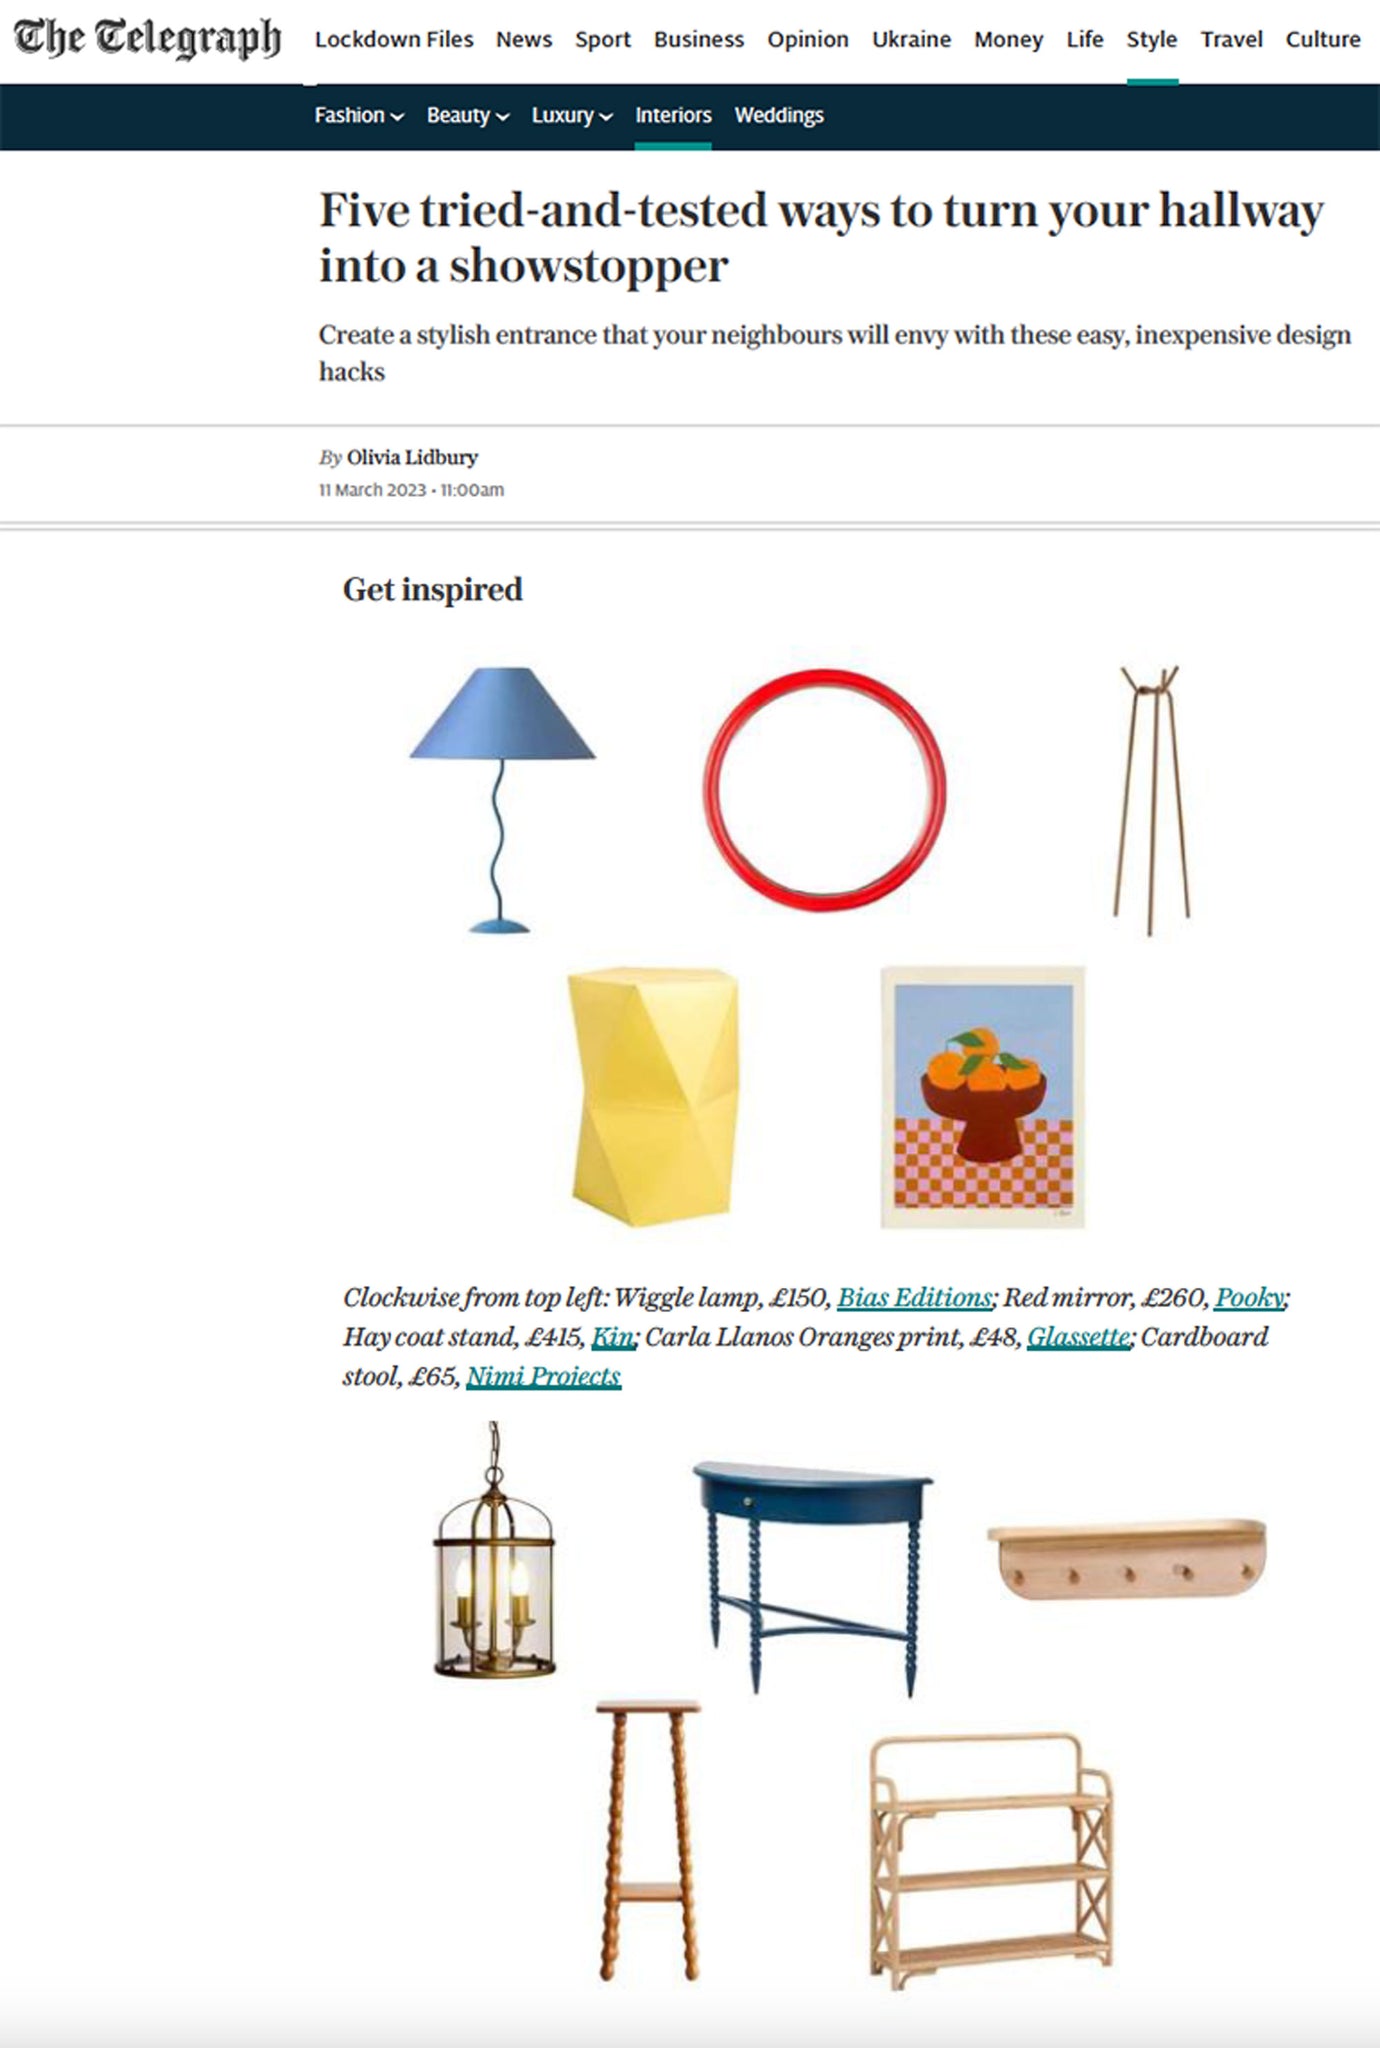 NiMi Projects' paper Catachi Stool featured in The Telegraph, March 2023